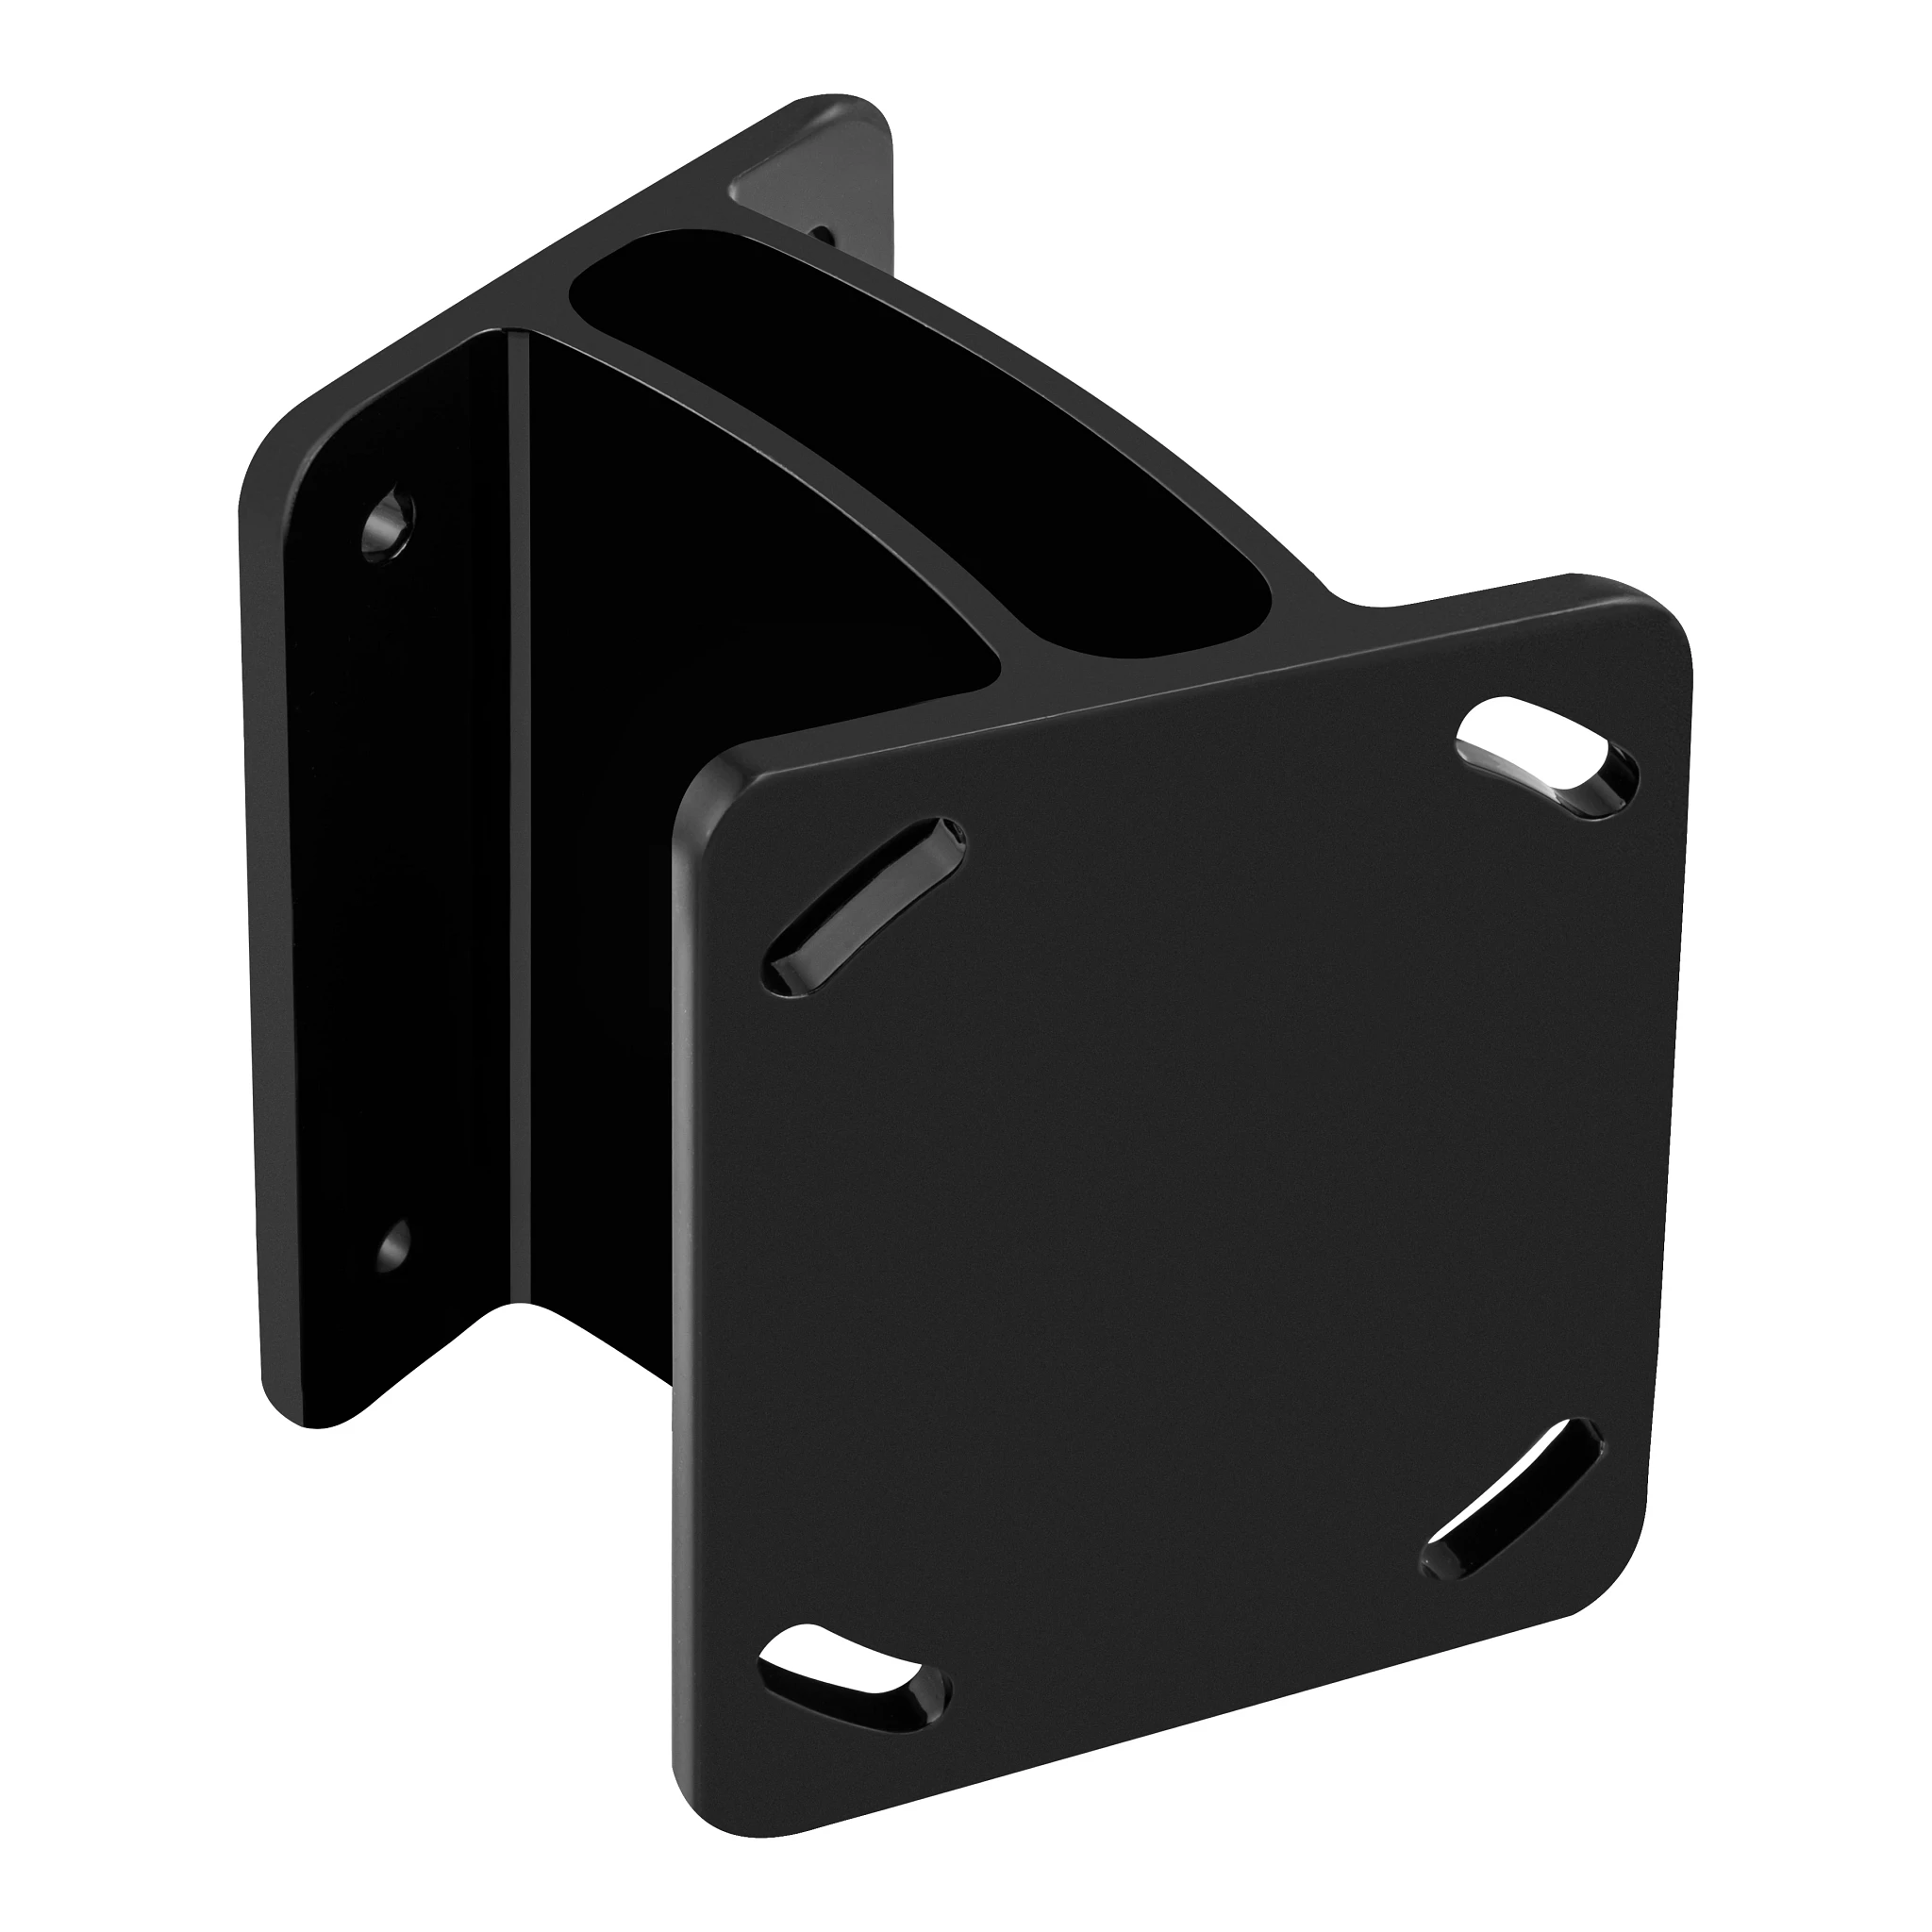 Black, direct mount angle bracket for Raptor shallow water anchor